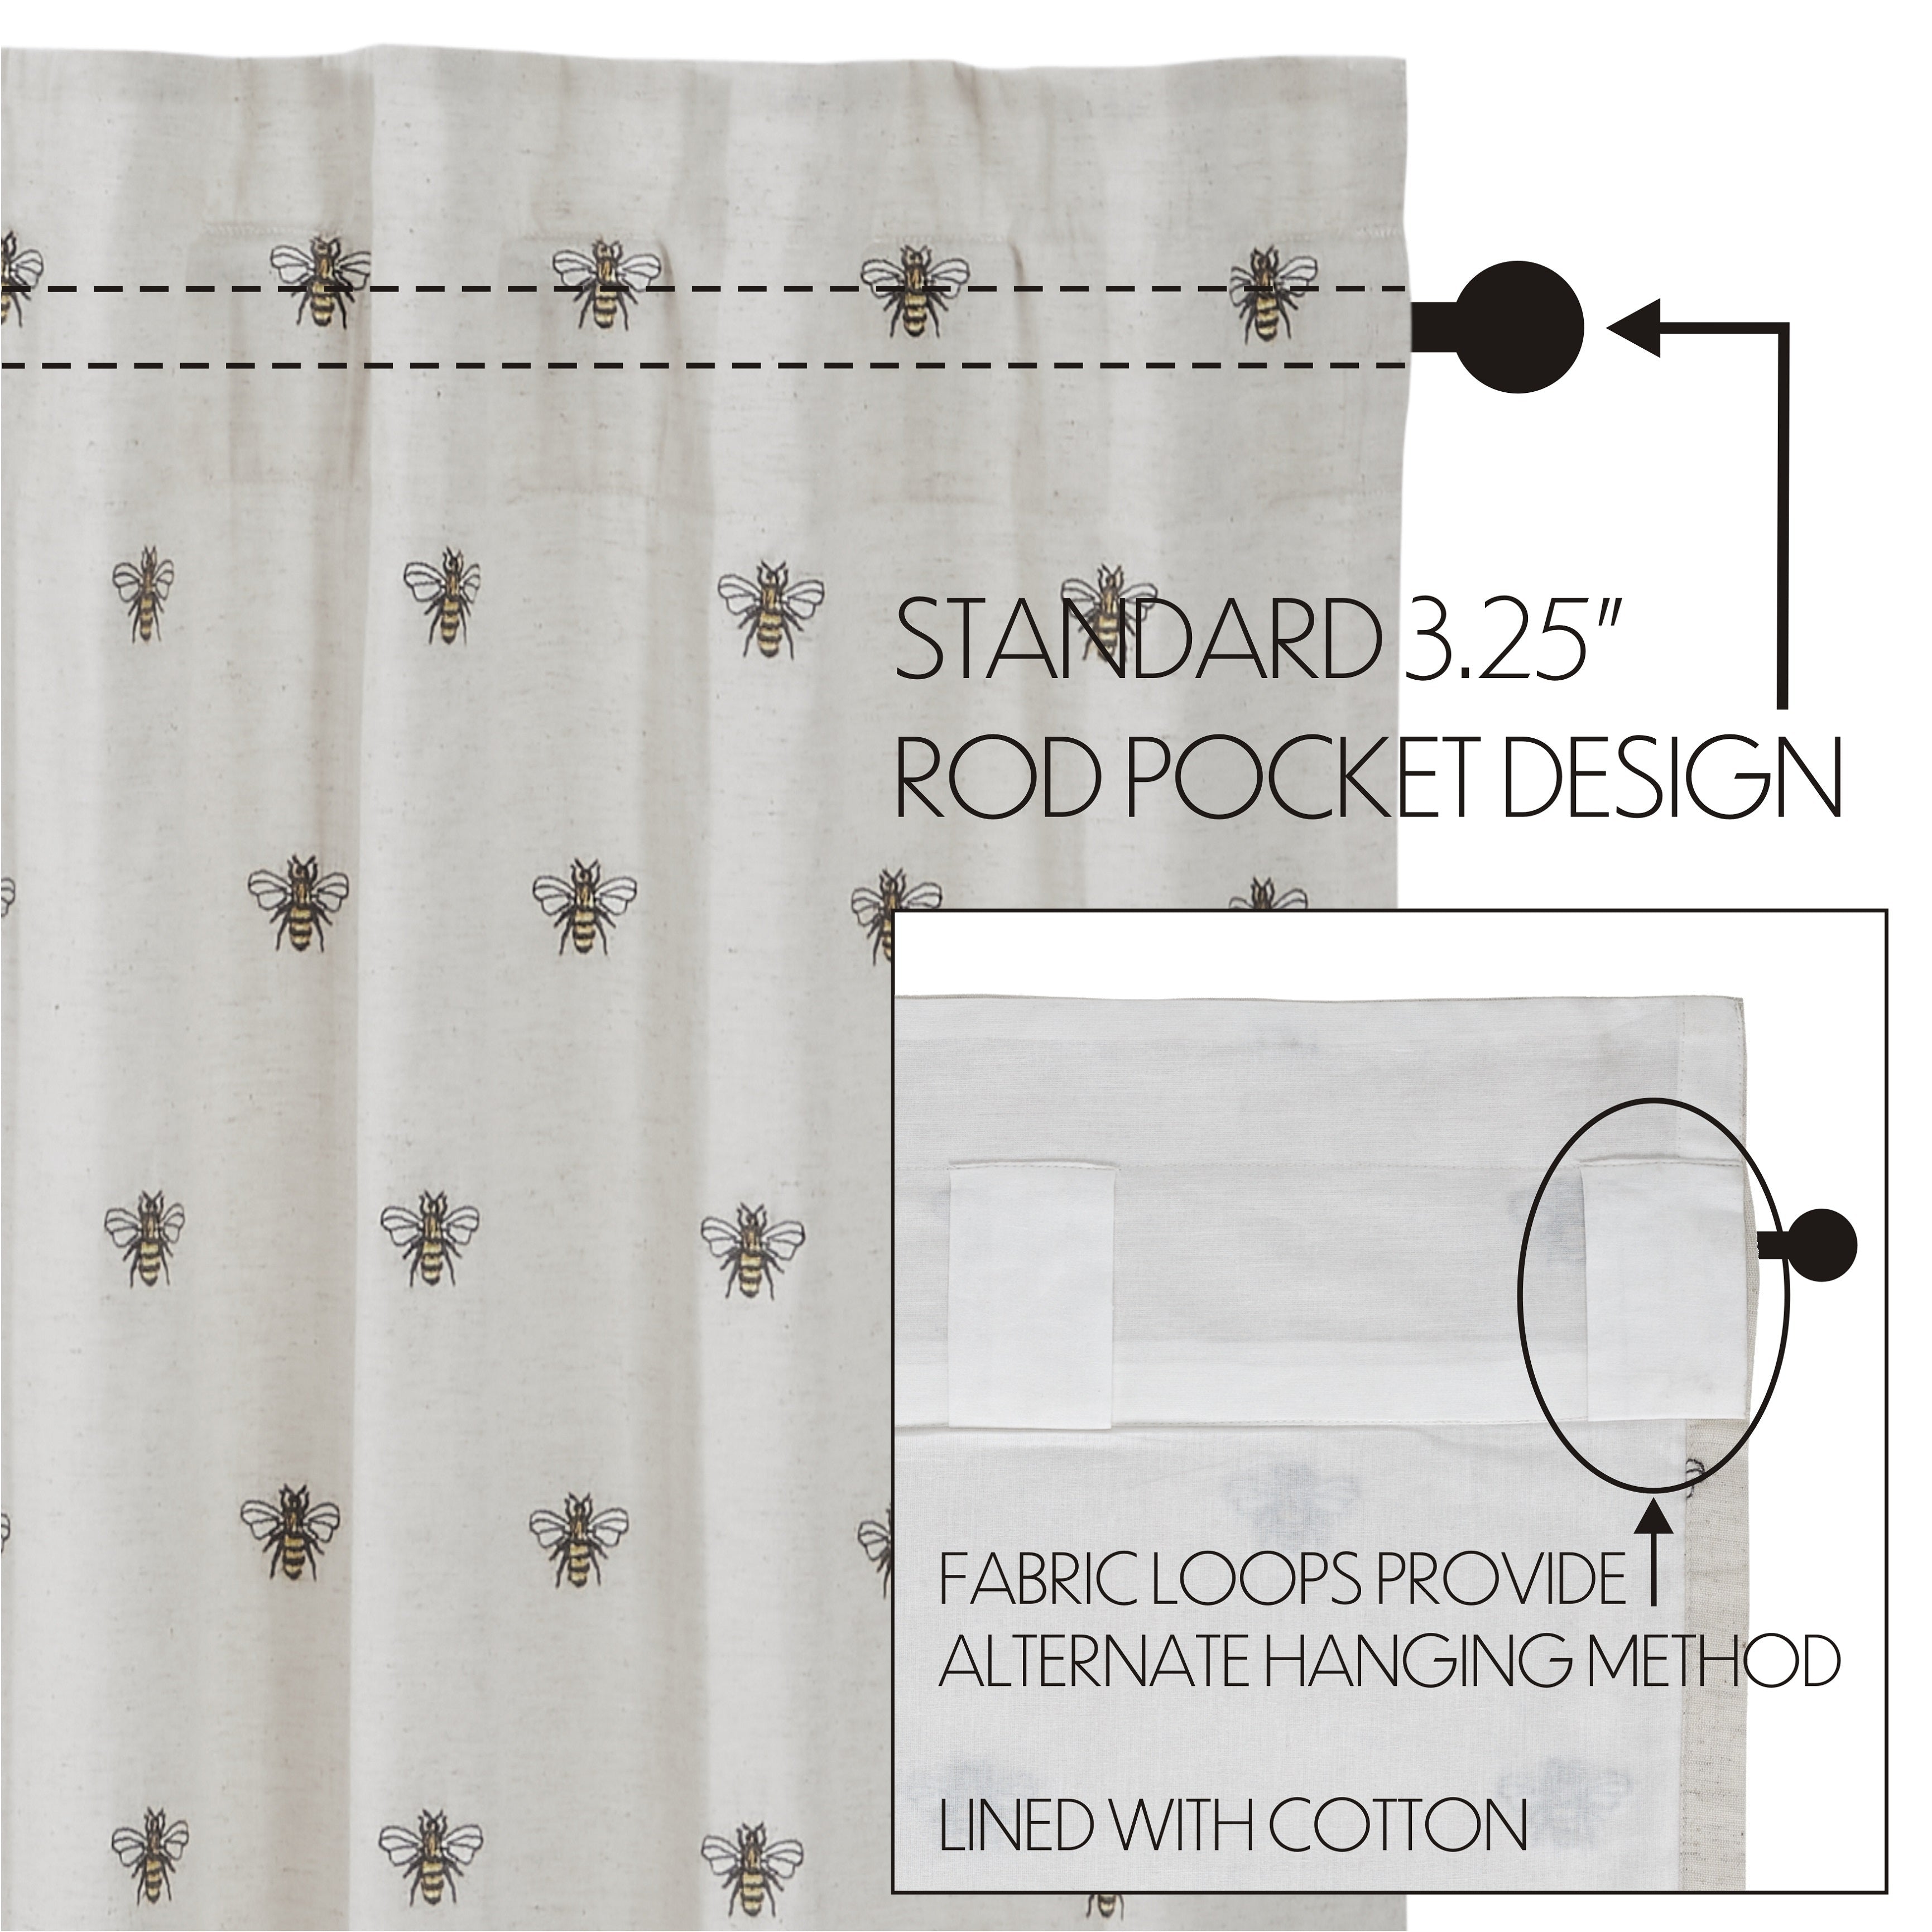 Embroidered Bee Tier Curtain Set of 2 L36xW36 VHC Brands